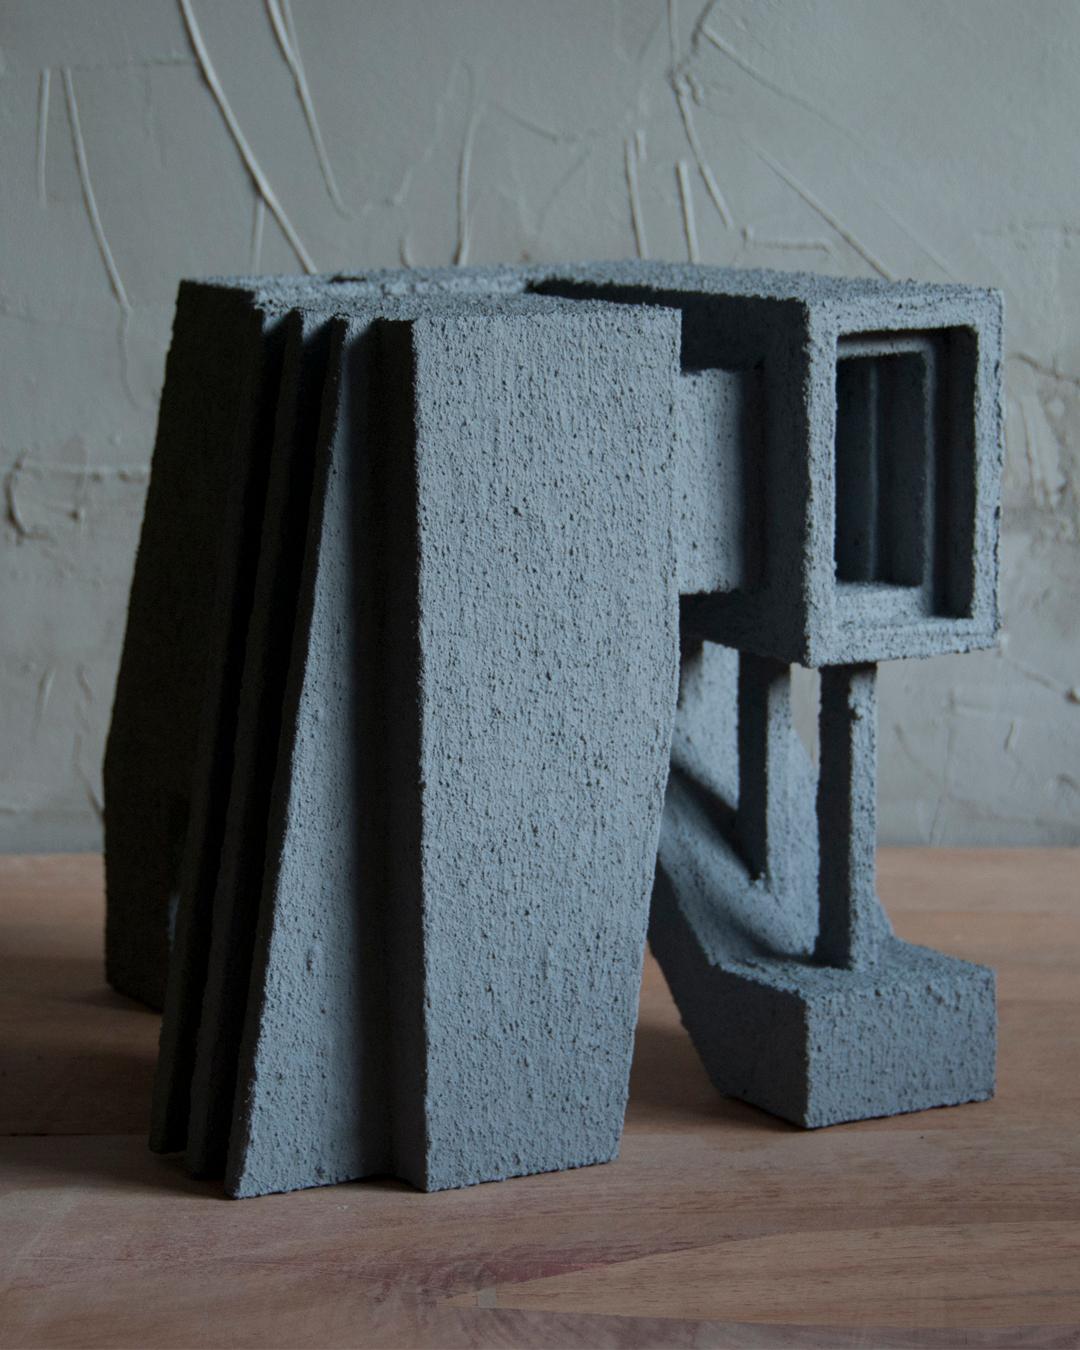 Hand-Crafted Sculpture Contemporary Geometric Constructivist Wood Concrete Grey- The Elephant For Sale